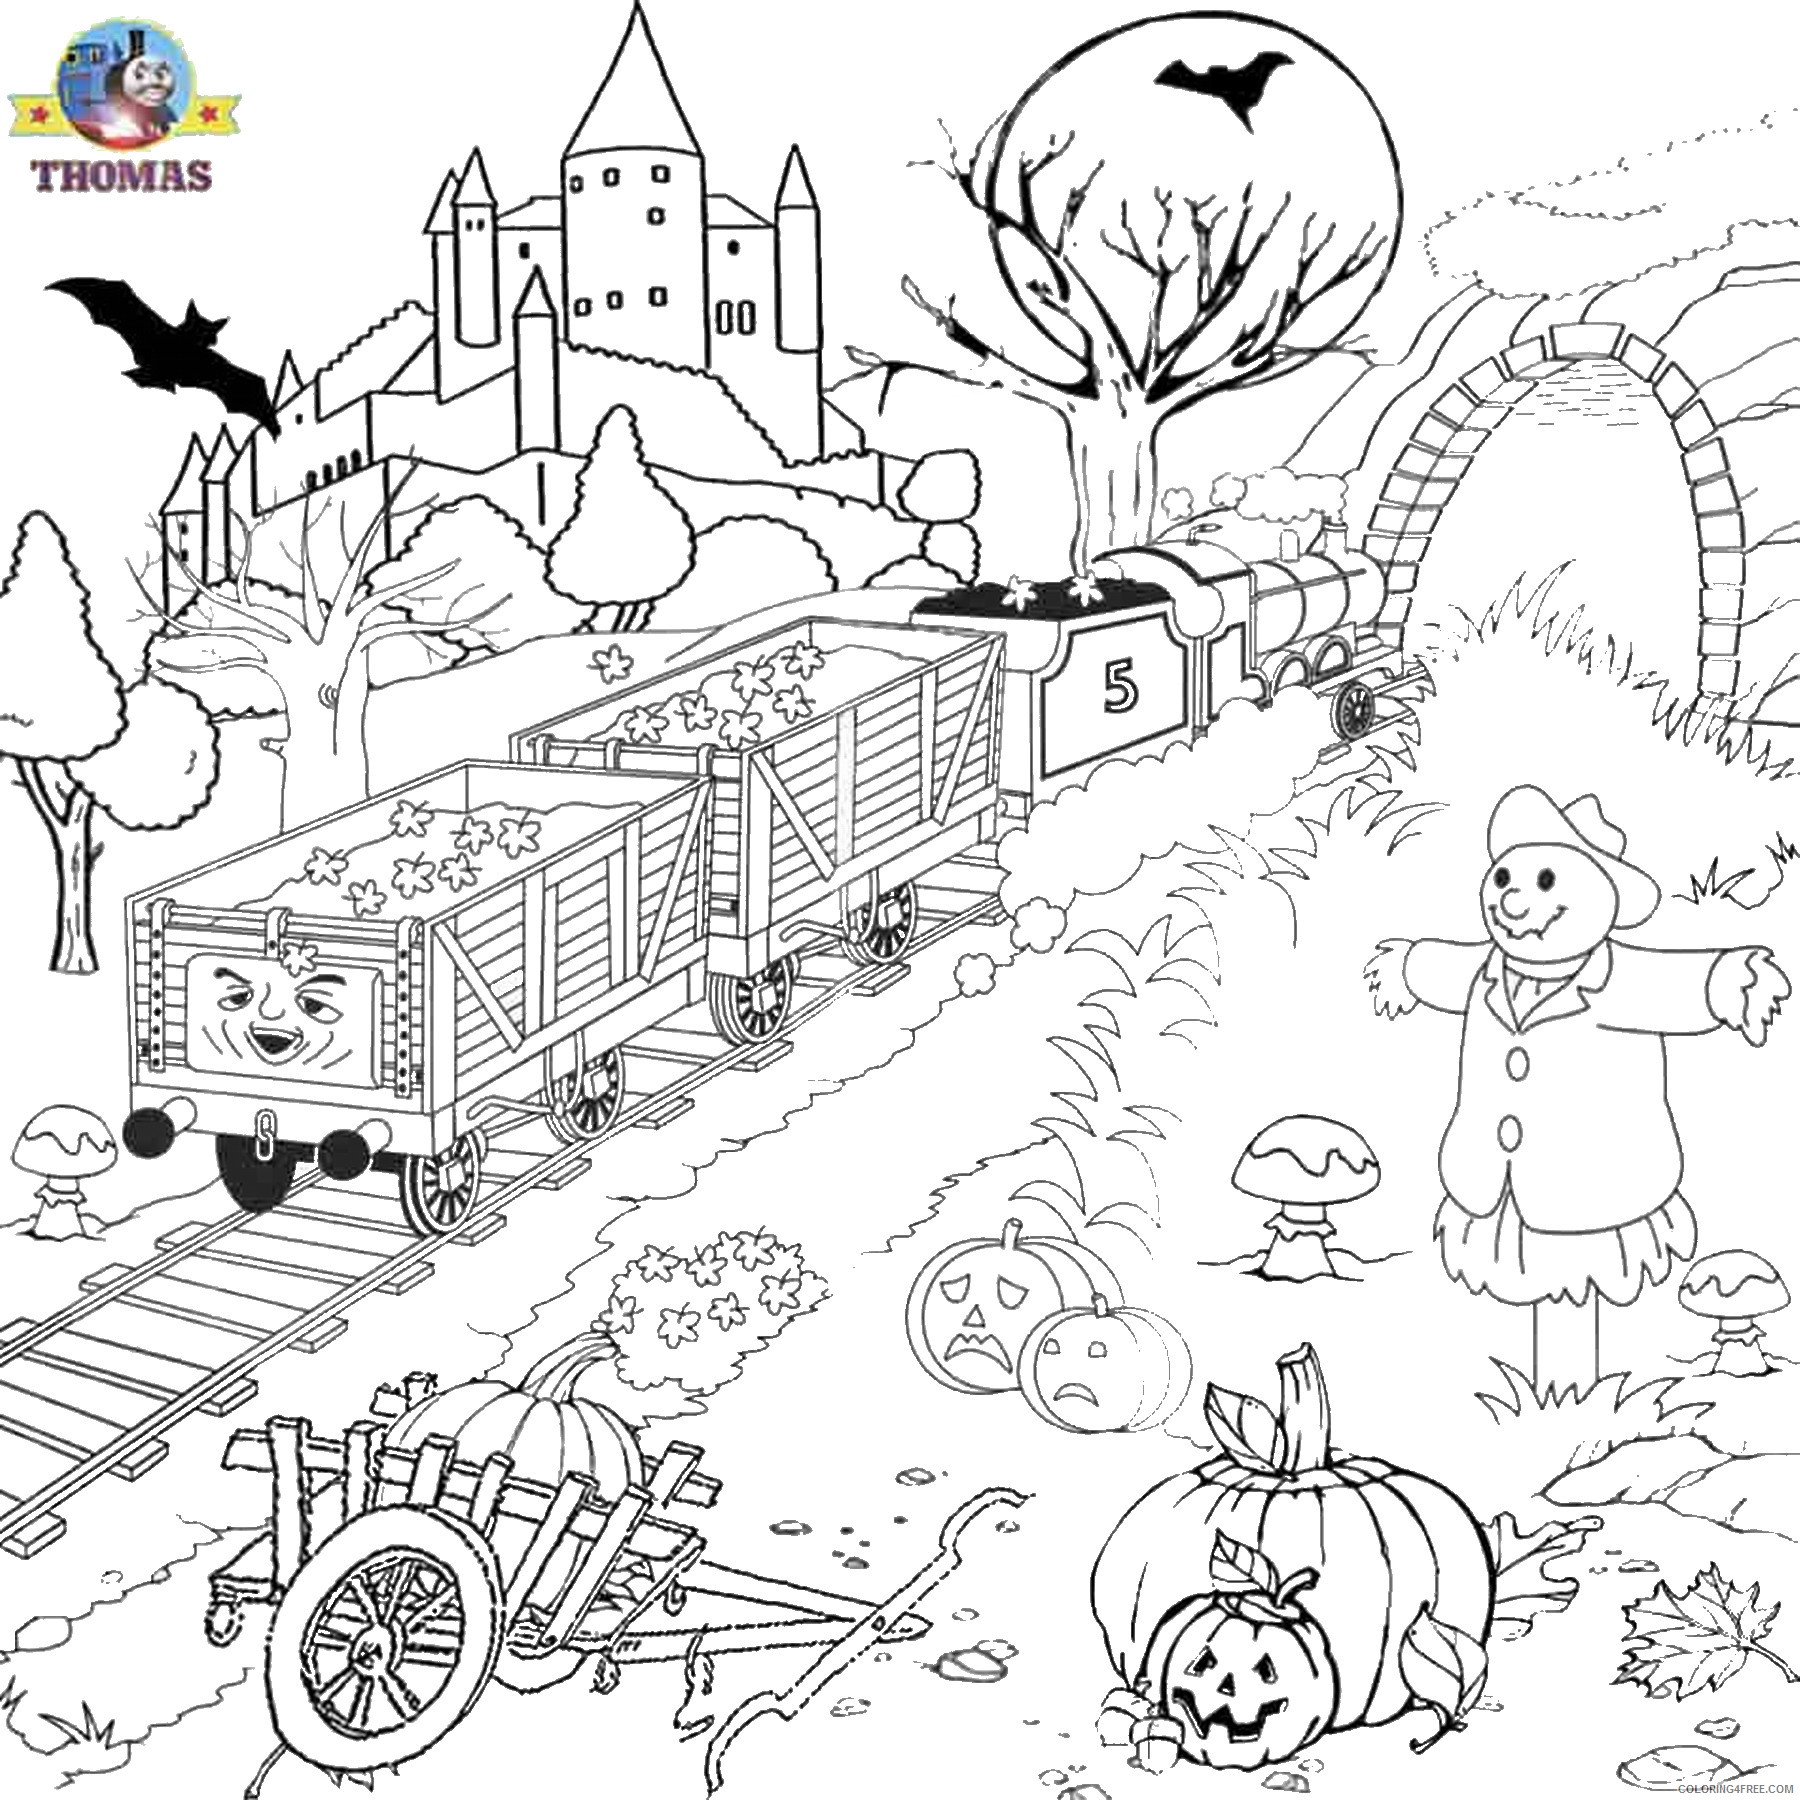 Thomas and Friends Coloring Pages Cartoons thomas_tank_engine_cl22 Printable 2020 6525 Coloring4free